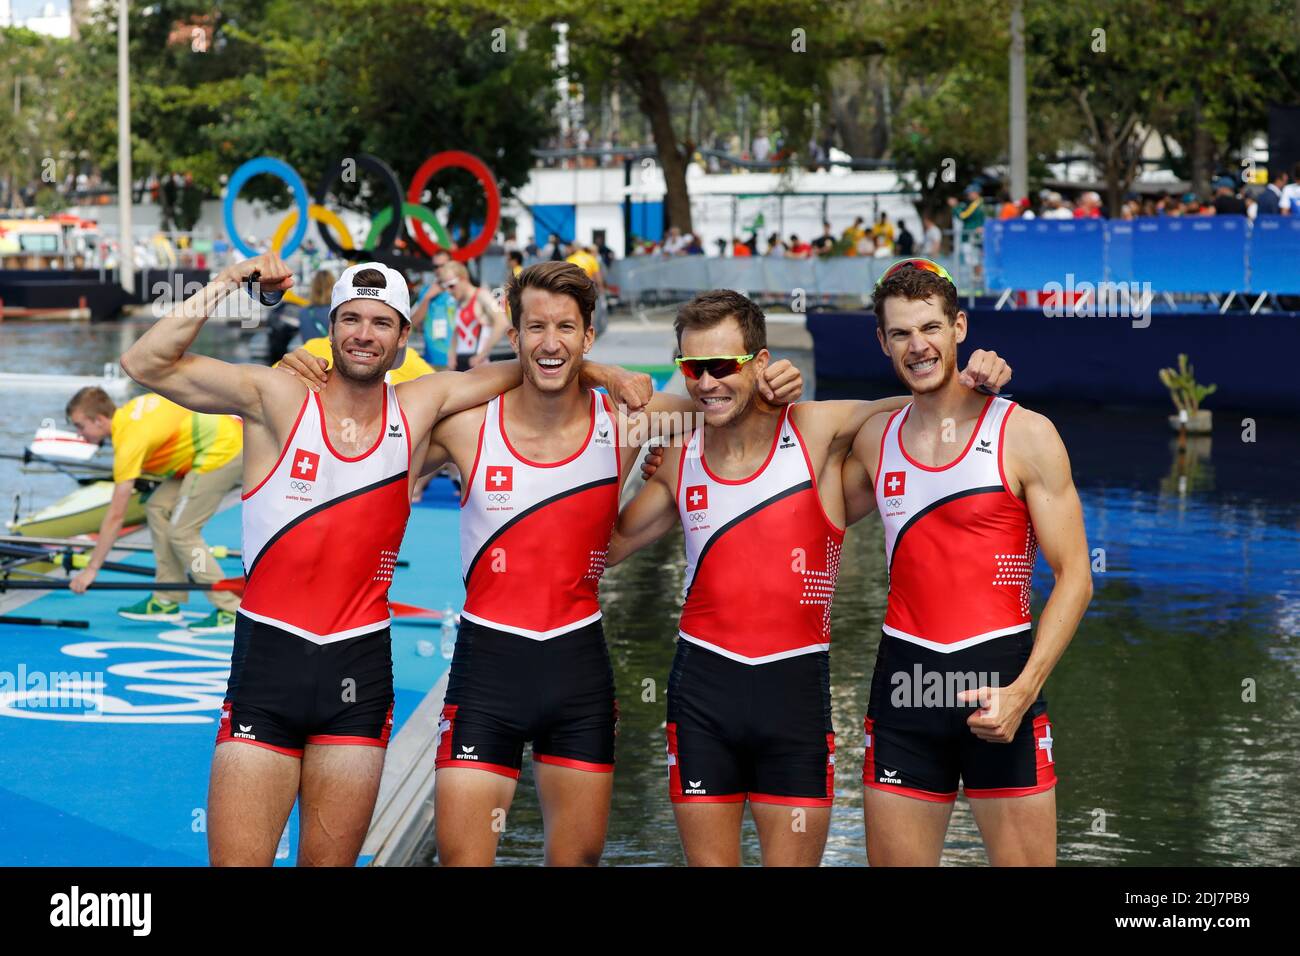 won in the rowing XXXX event in Lagoa Rowing Stadium, Rio, Brasil on August  11th, 2016. Photo by Henri Szwarc/ABACAPRESS.COM Stock Photo - Alamy